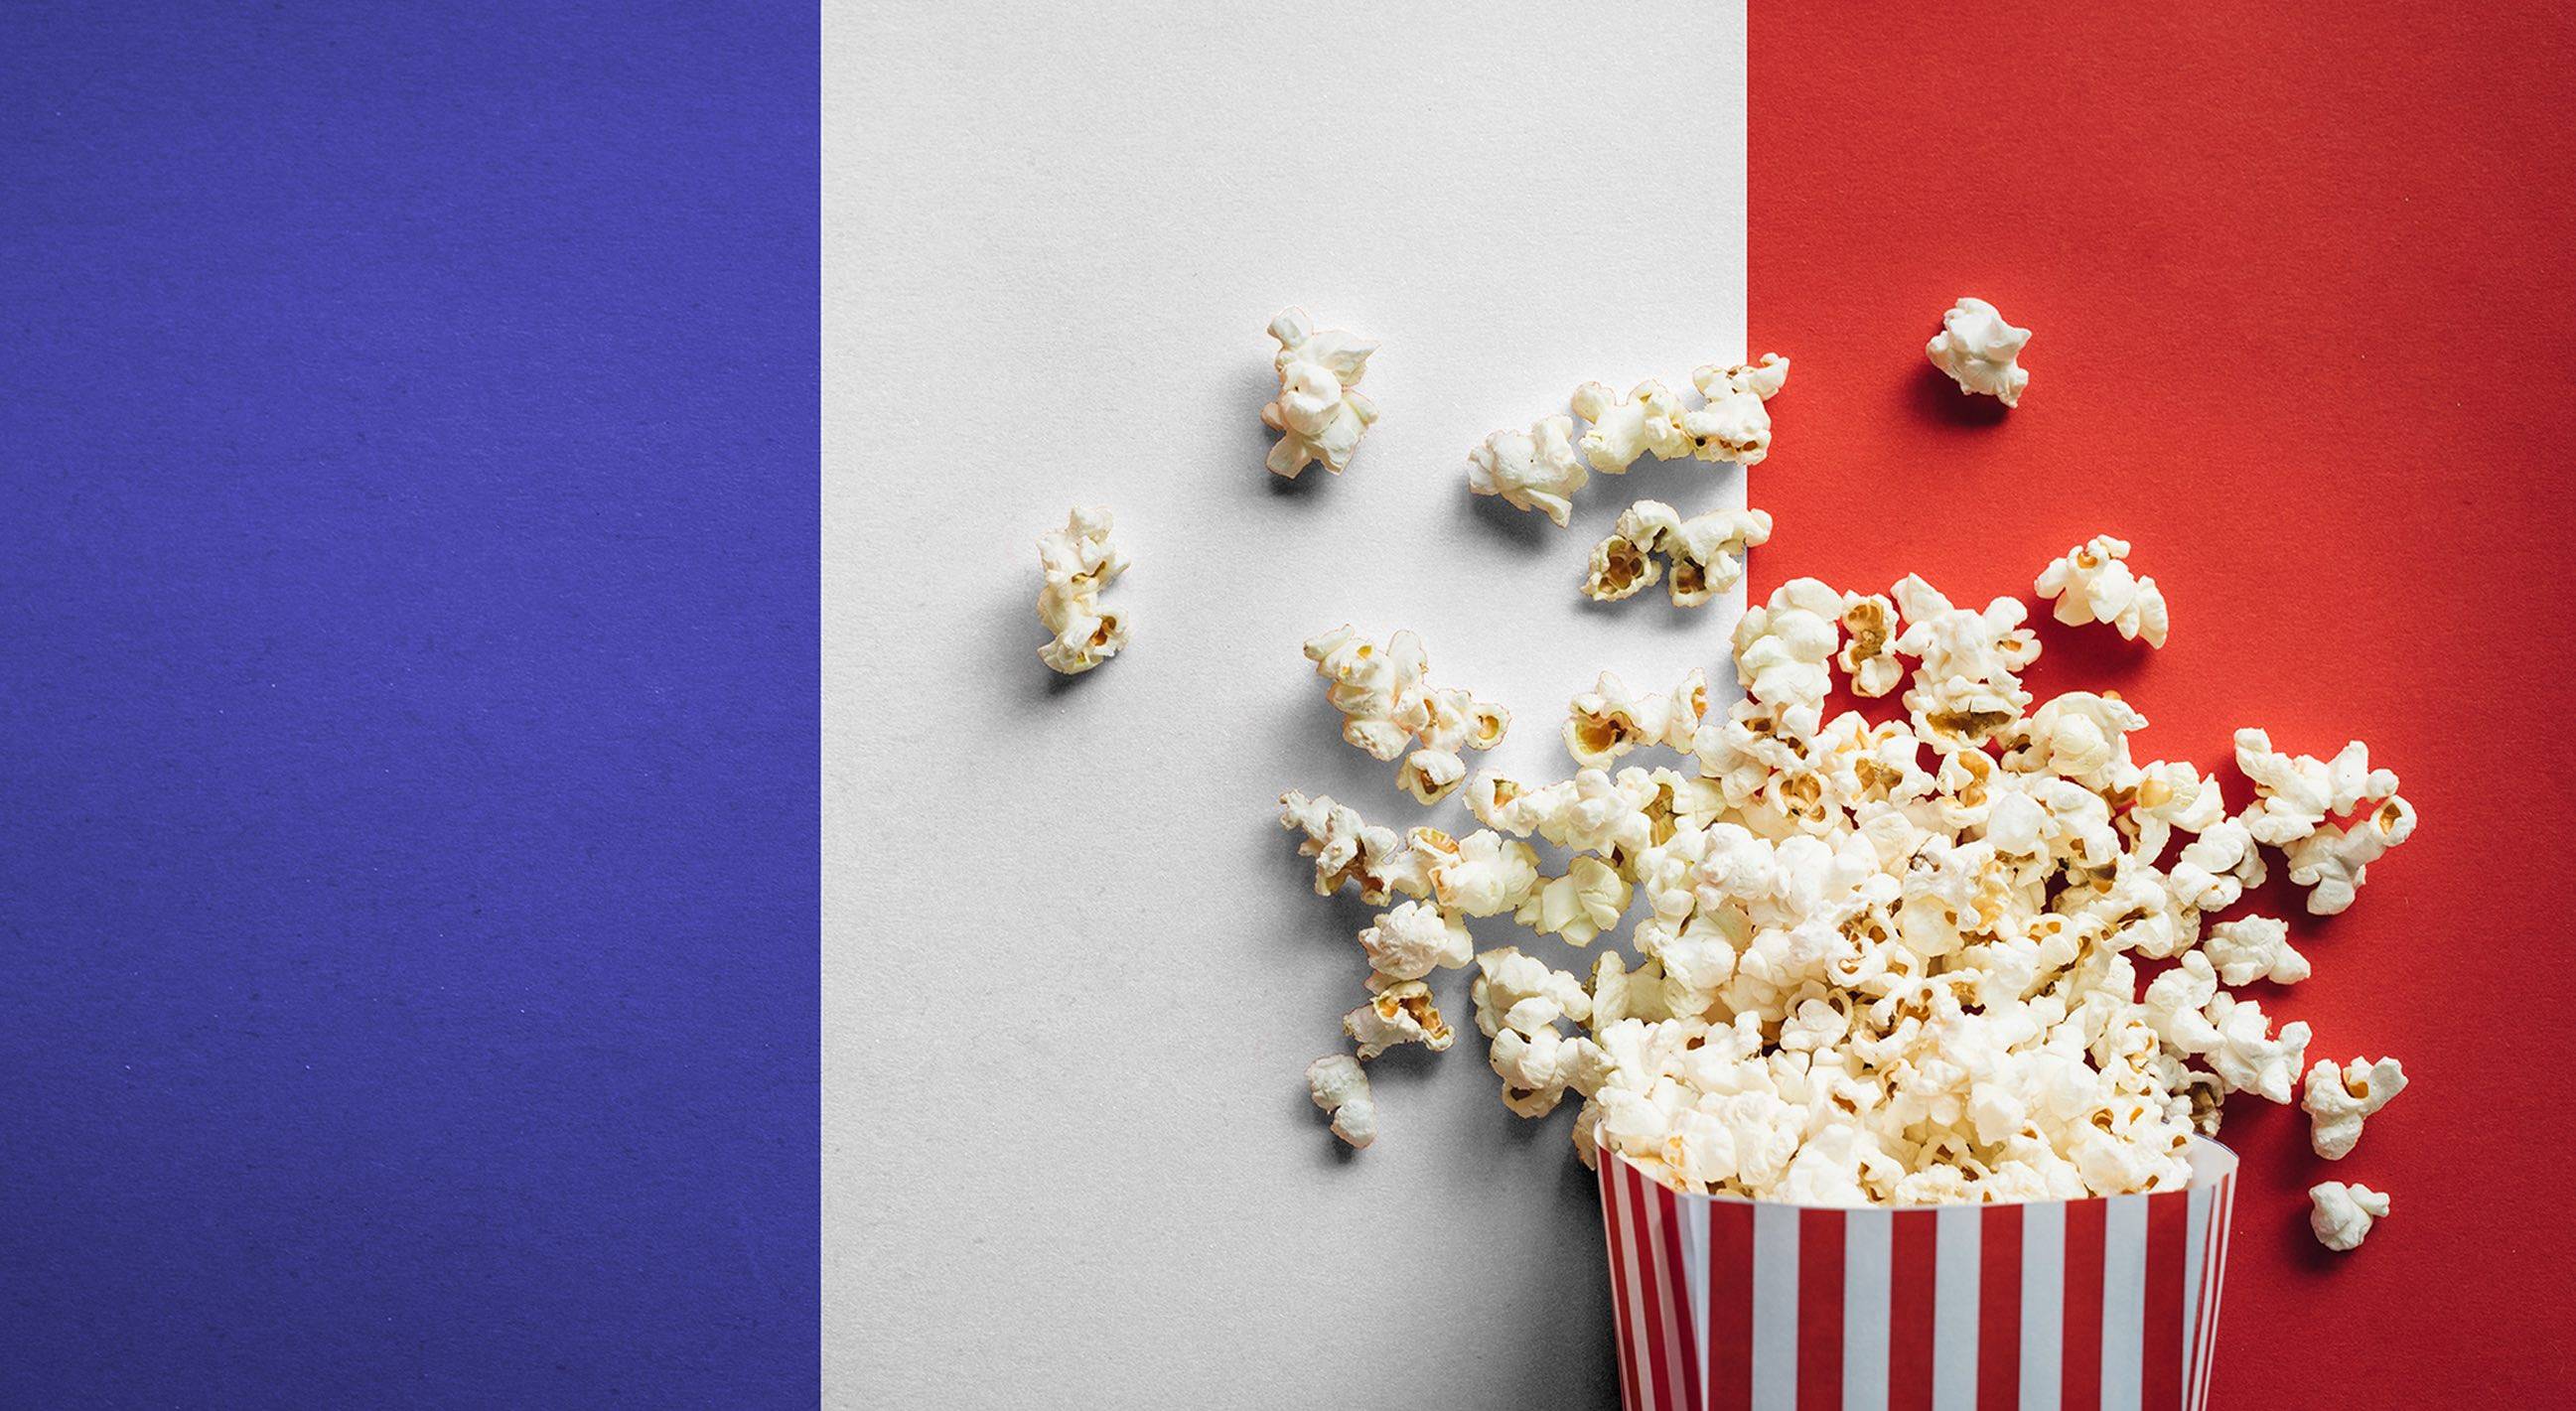 french flag with popcorn spilling onto it